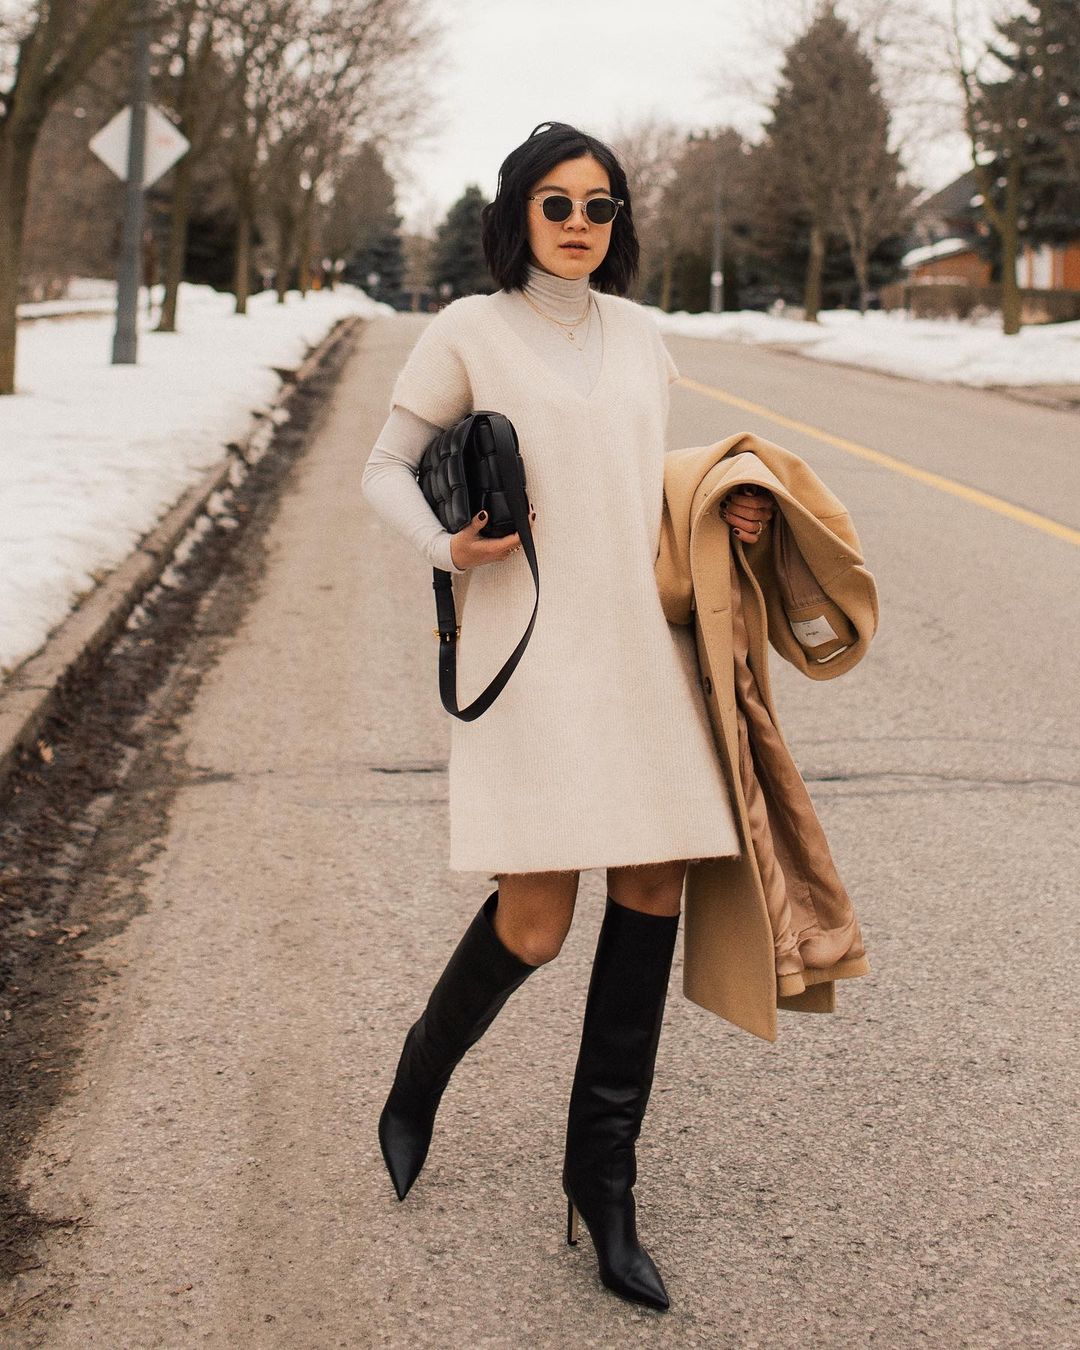 Here's How to Elevate Your Sweaterdress This Fall — @jessundecided Instagram outfit idea with a white sweater dress, layered turtleneck, camel coat, and black knee-high boots with pointed toe